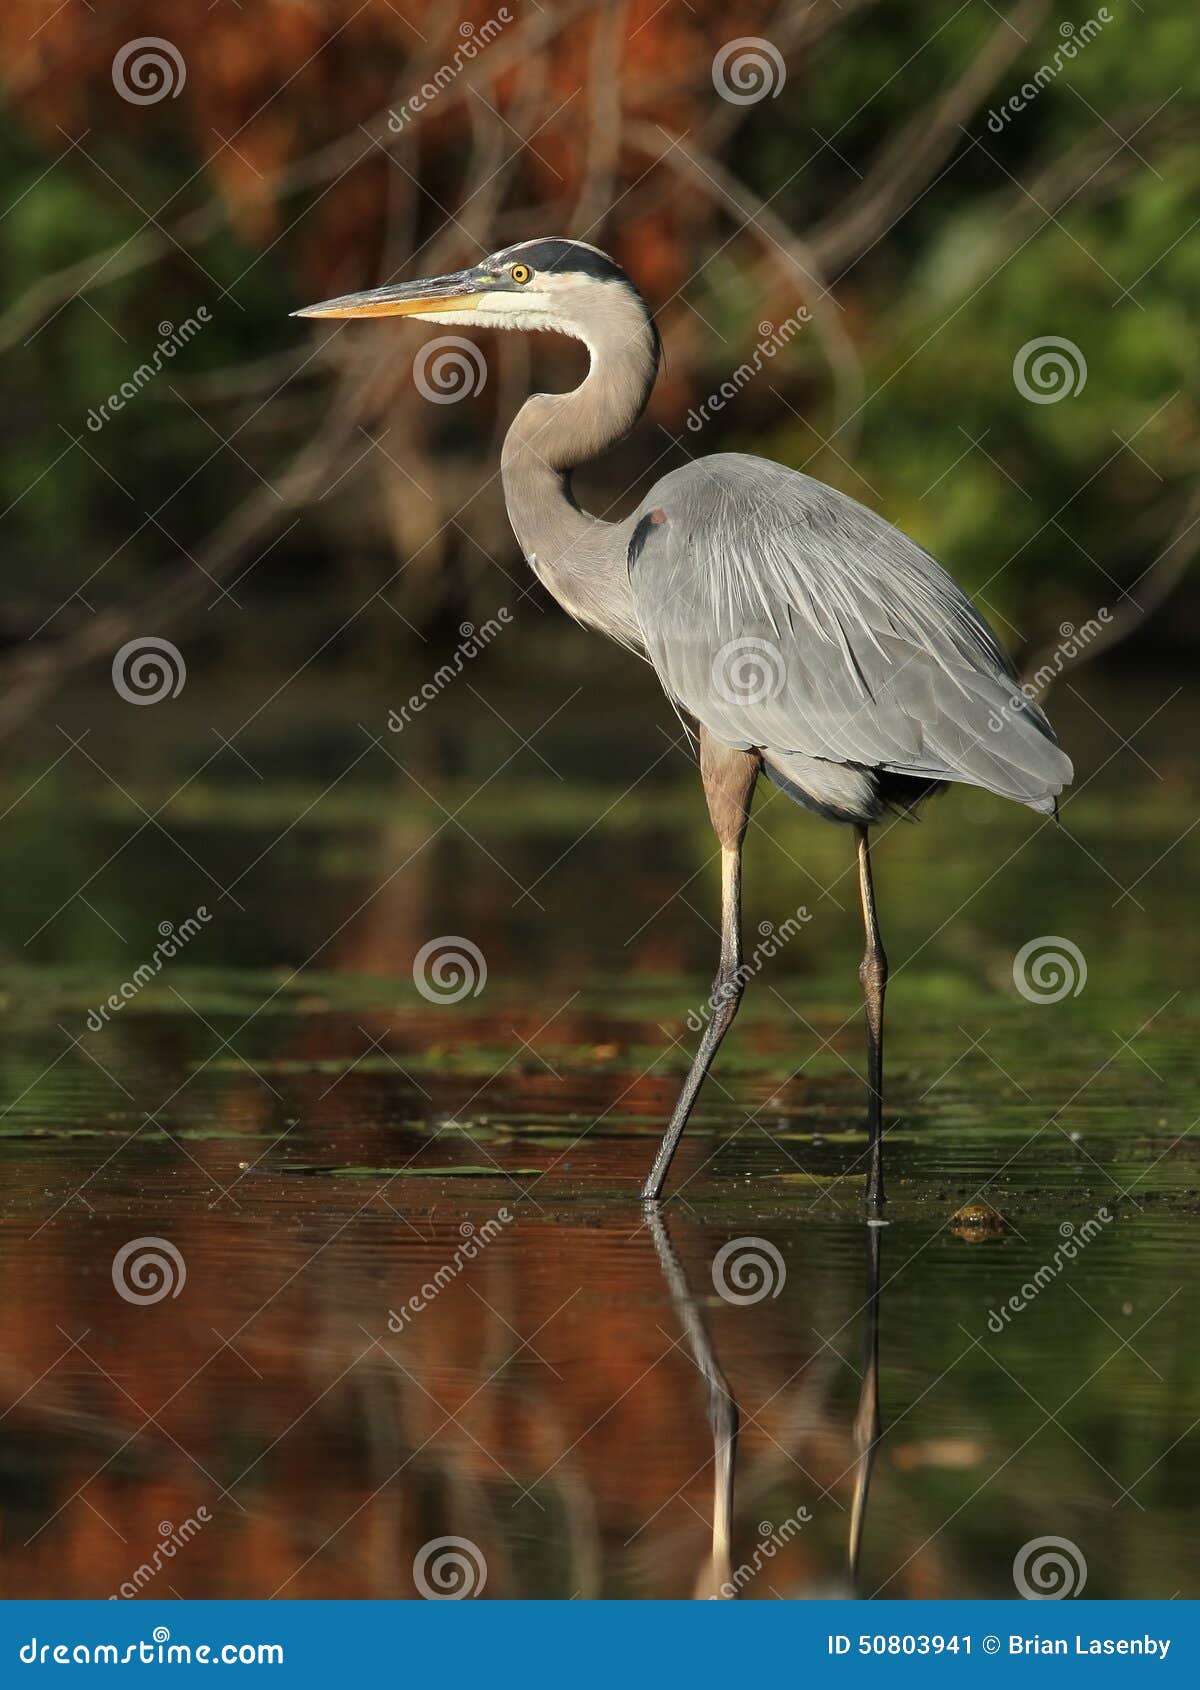 great blue heron wading in a shallow river - ontario, canada